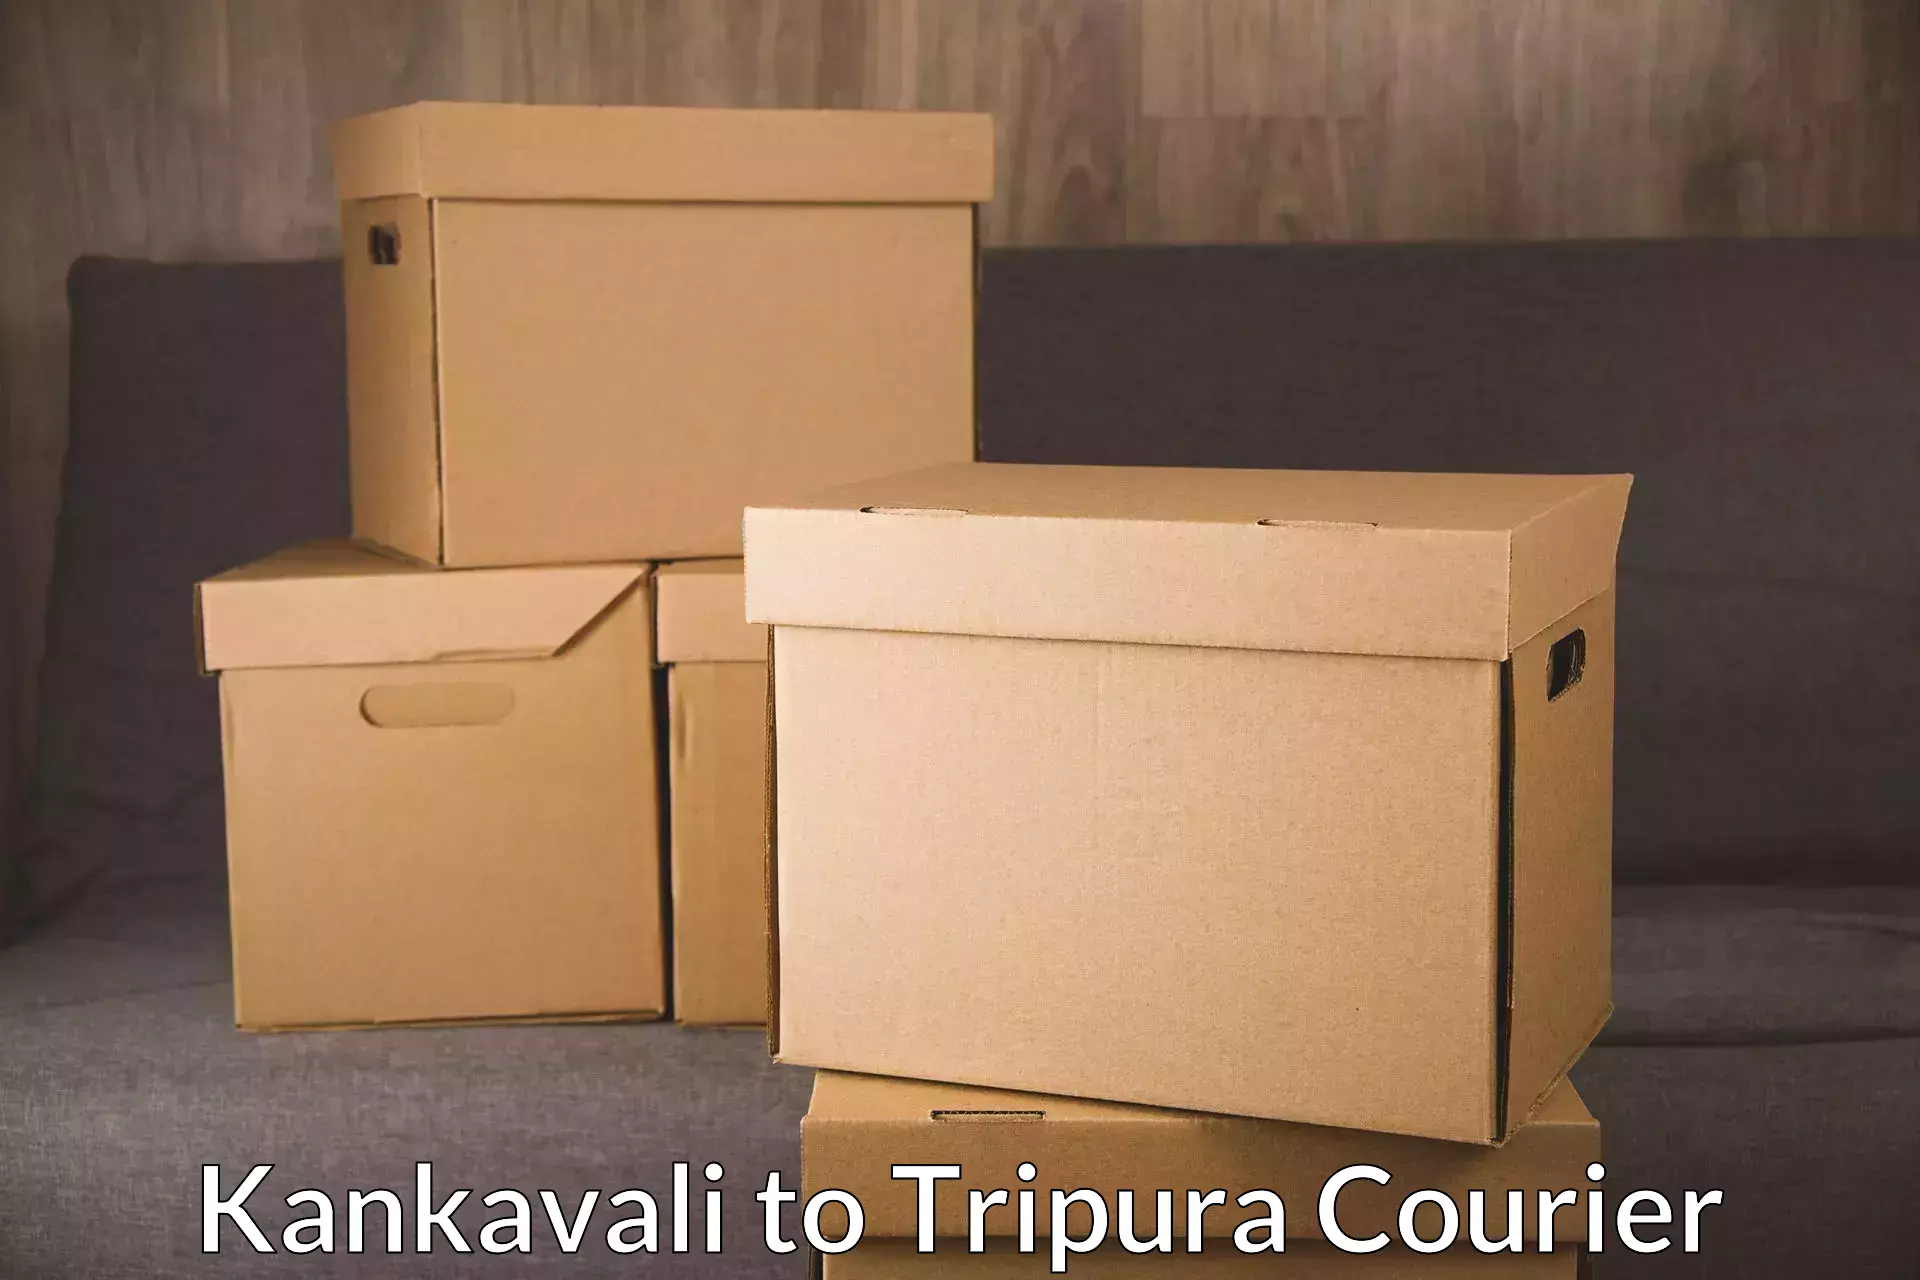 Subscription-based courier Kankavali to Udaipur Tripura